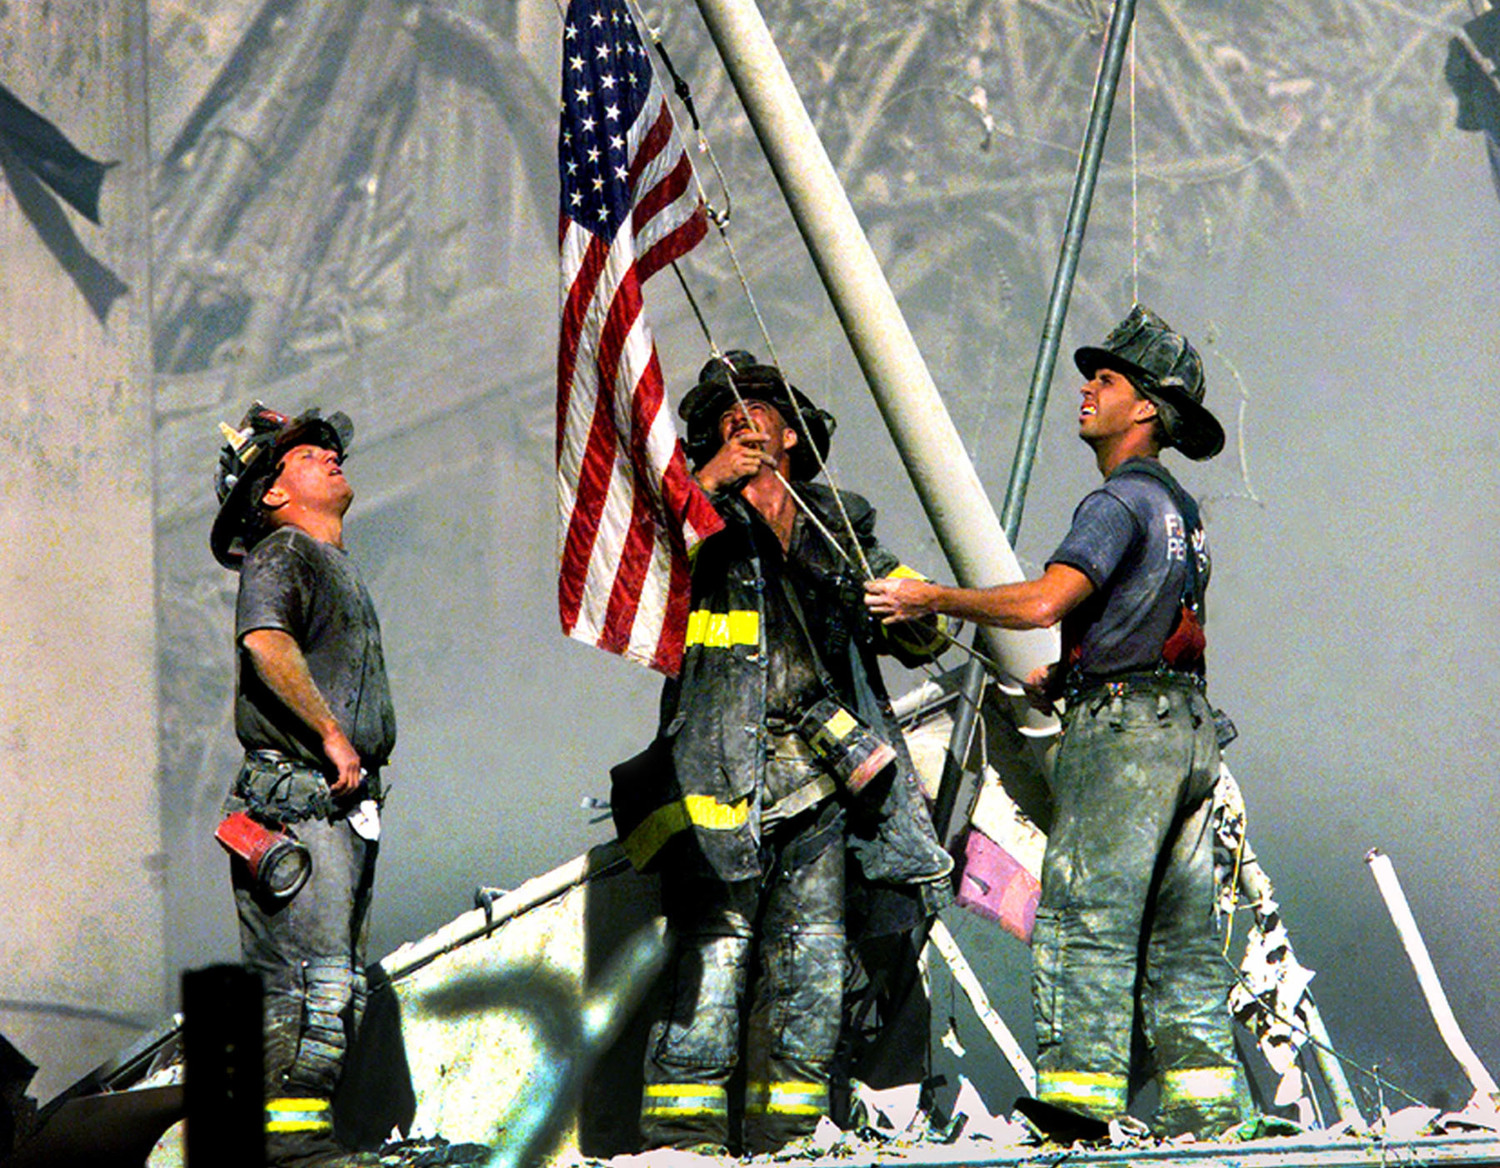 [Firefighters raising the American flag after the 9/11 attacks]